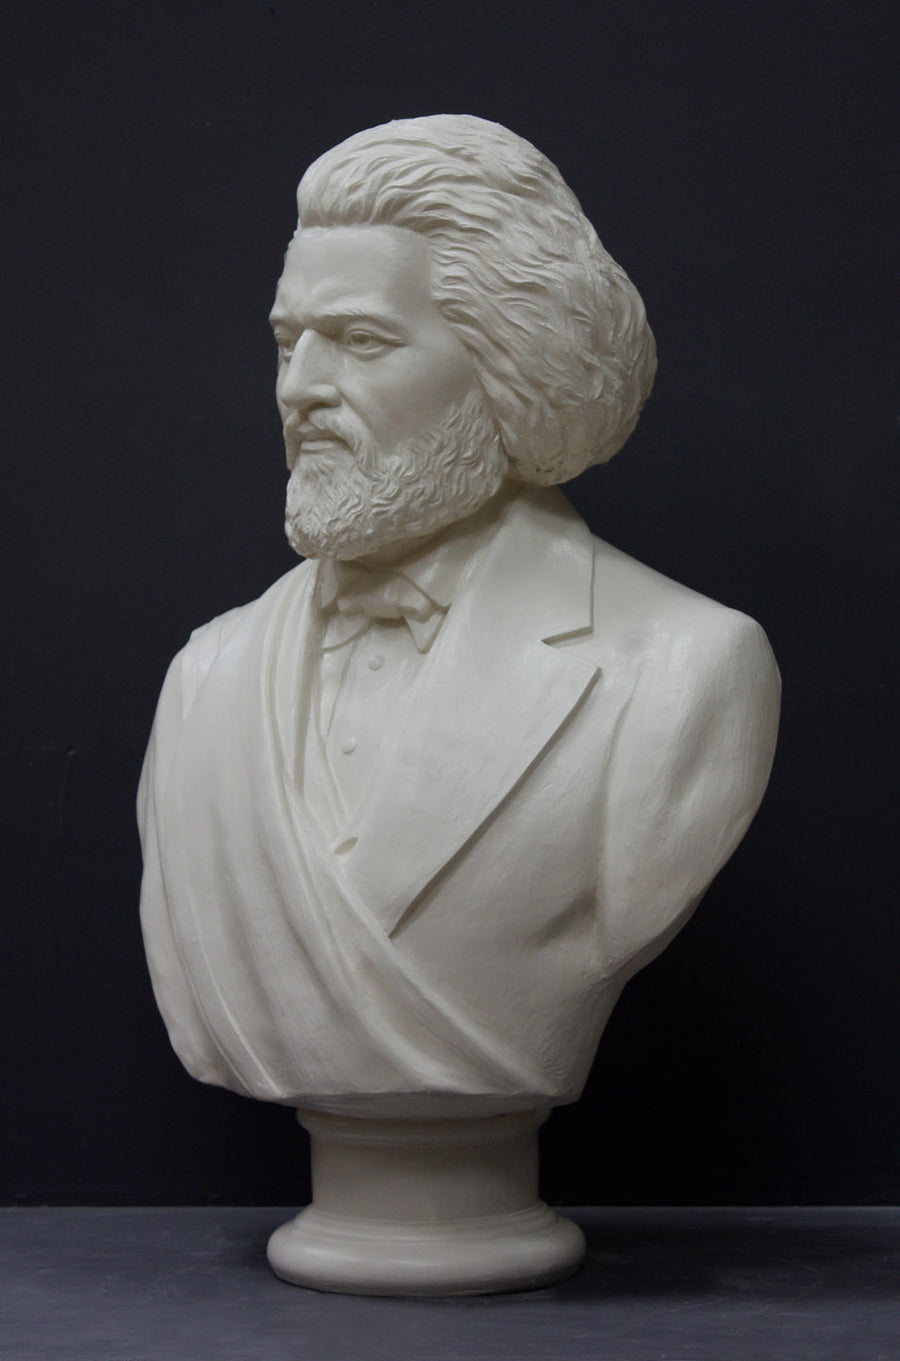 photo of white plaster cast sculpture of bust of Frederick Douglass with beard and in suit coat with toga over one shoulder on dark gray background